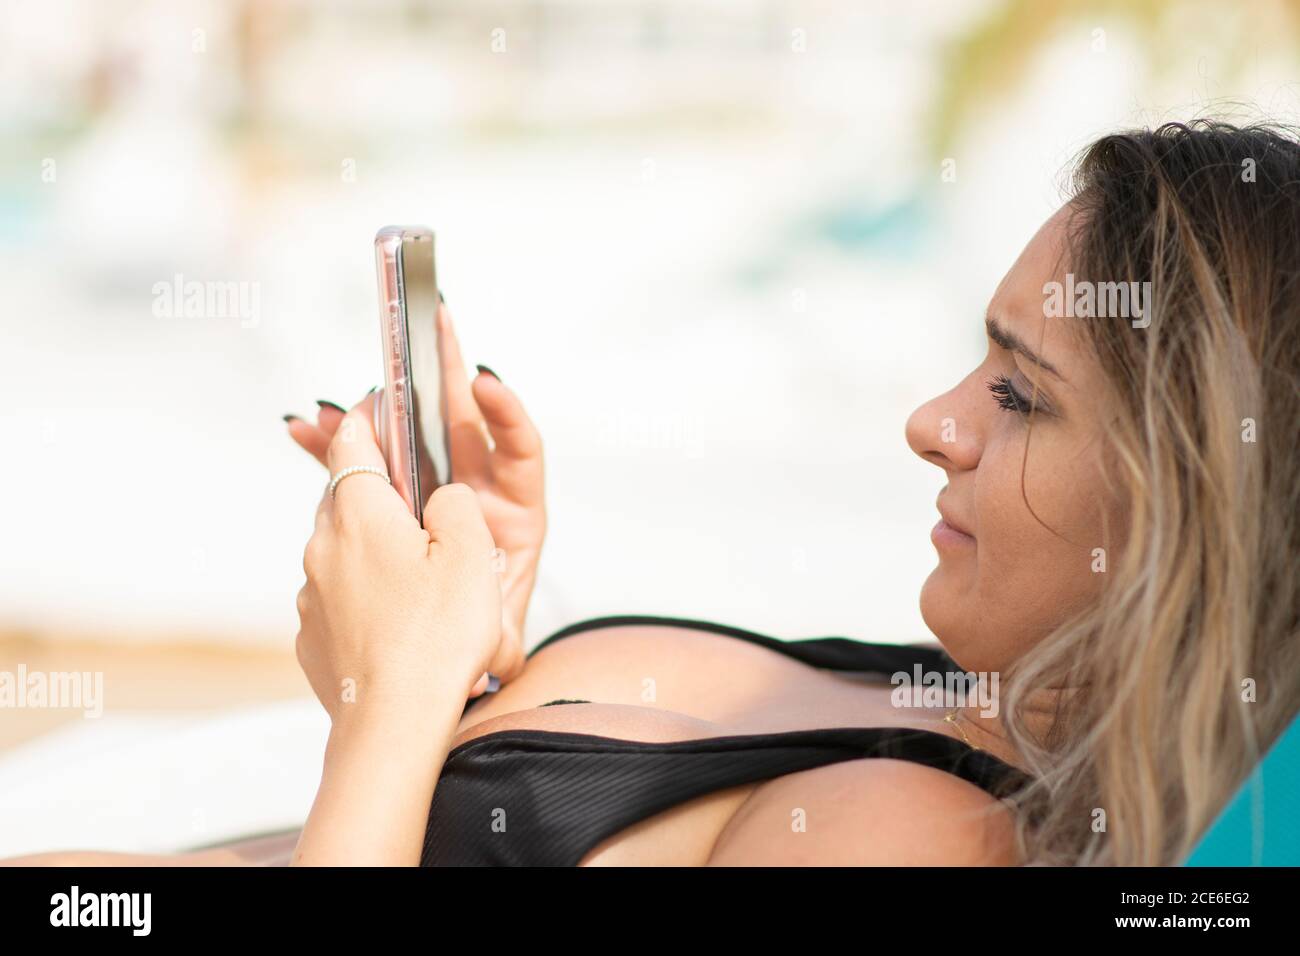 Woman texting on smart phone on the beach Stock Photo